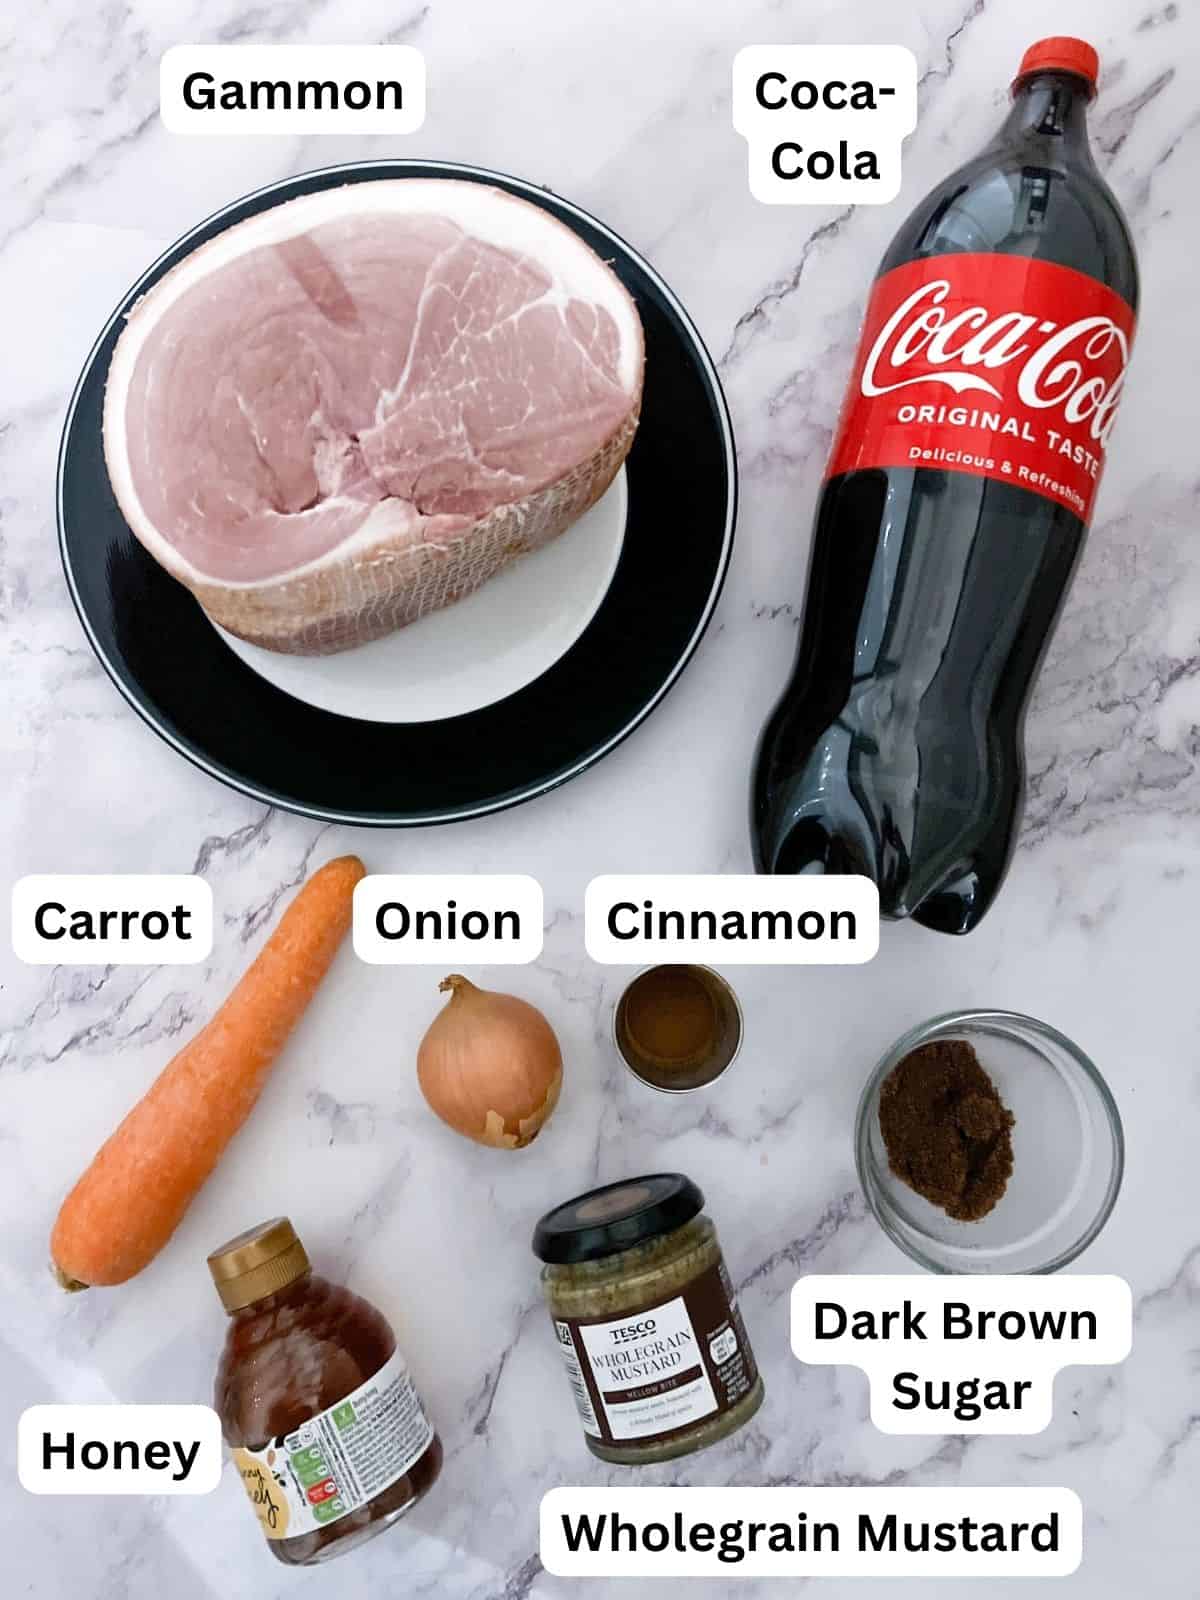 Ingredients laid out for slow cooker gammon in coke.